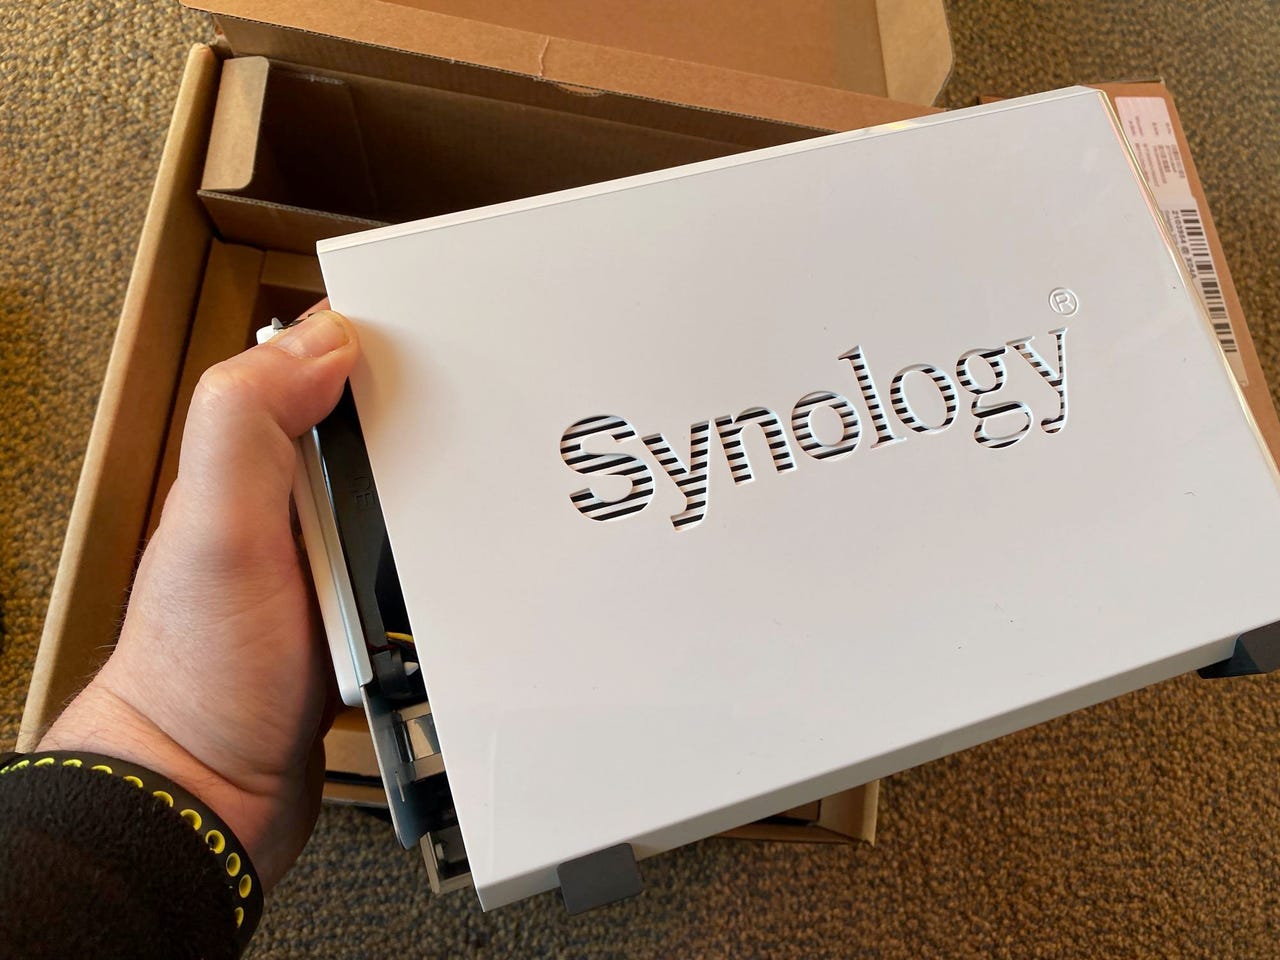 Synology DS218j